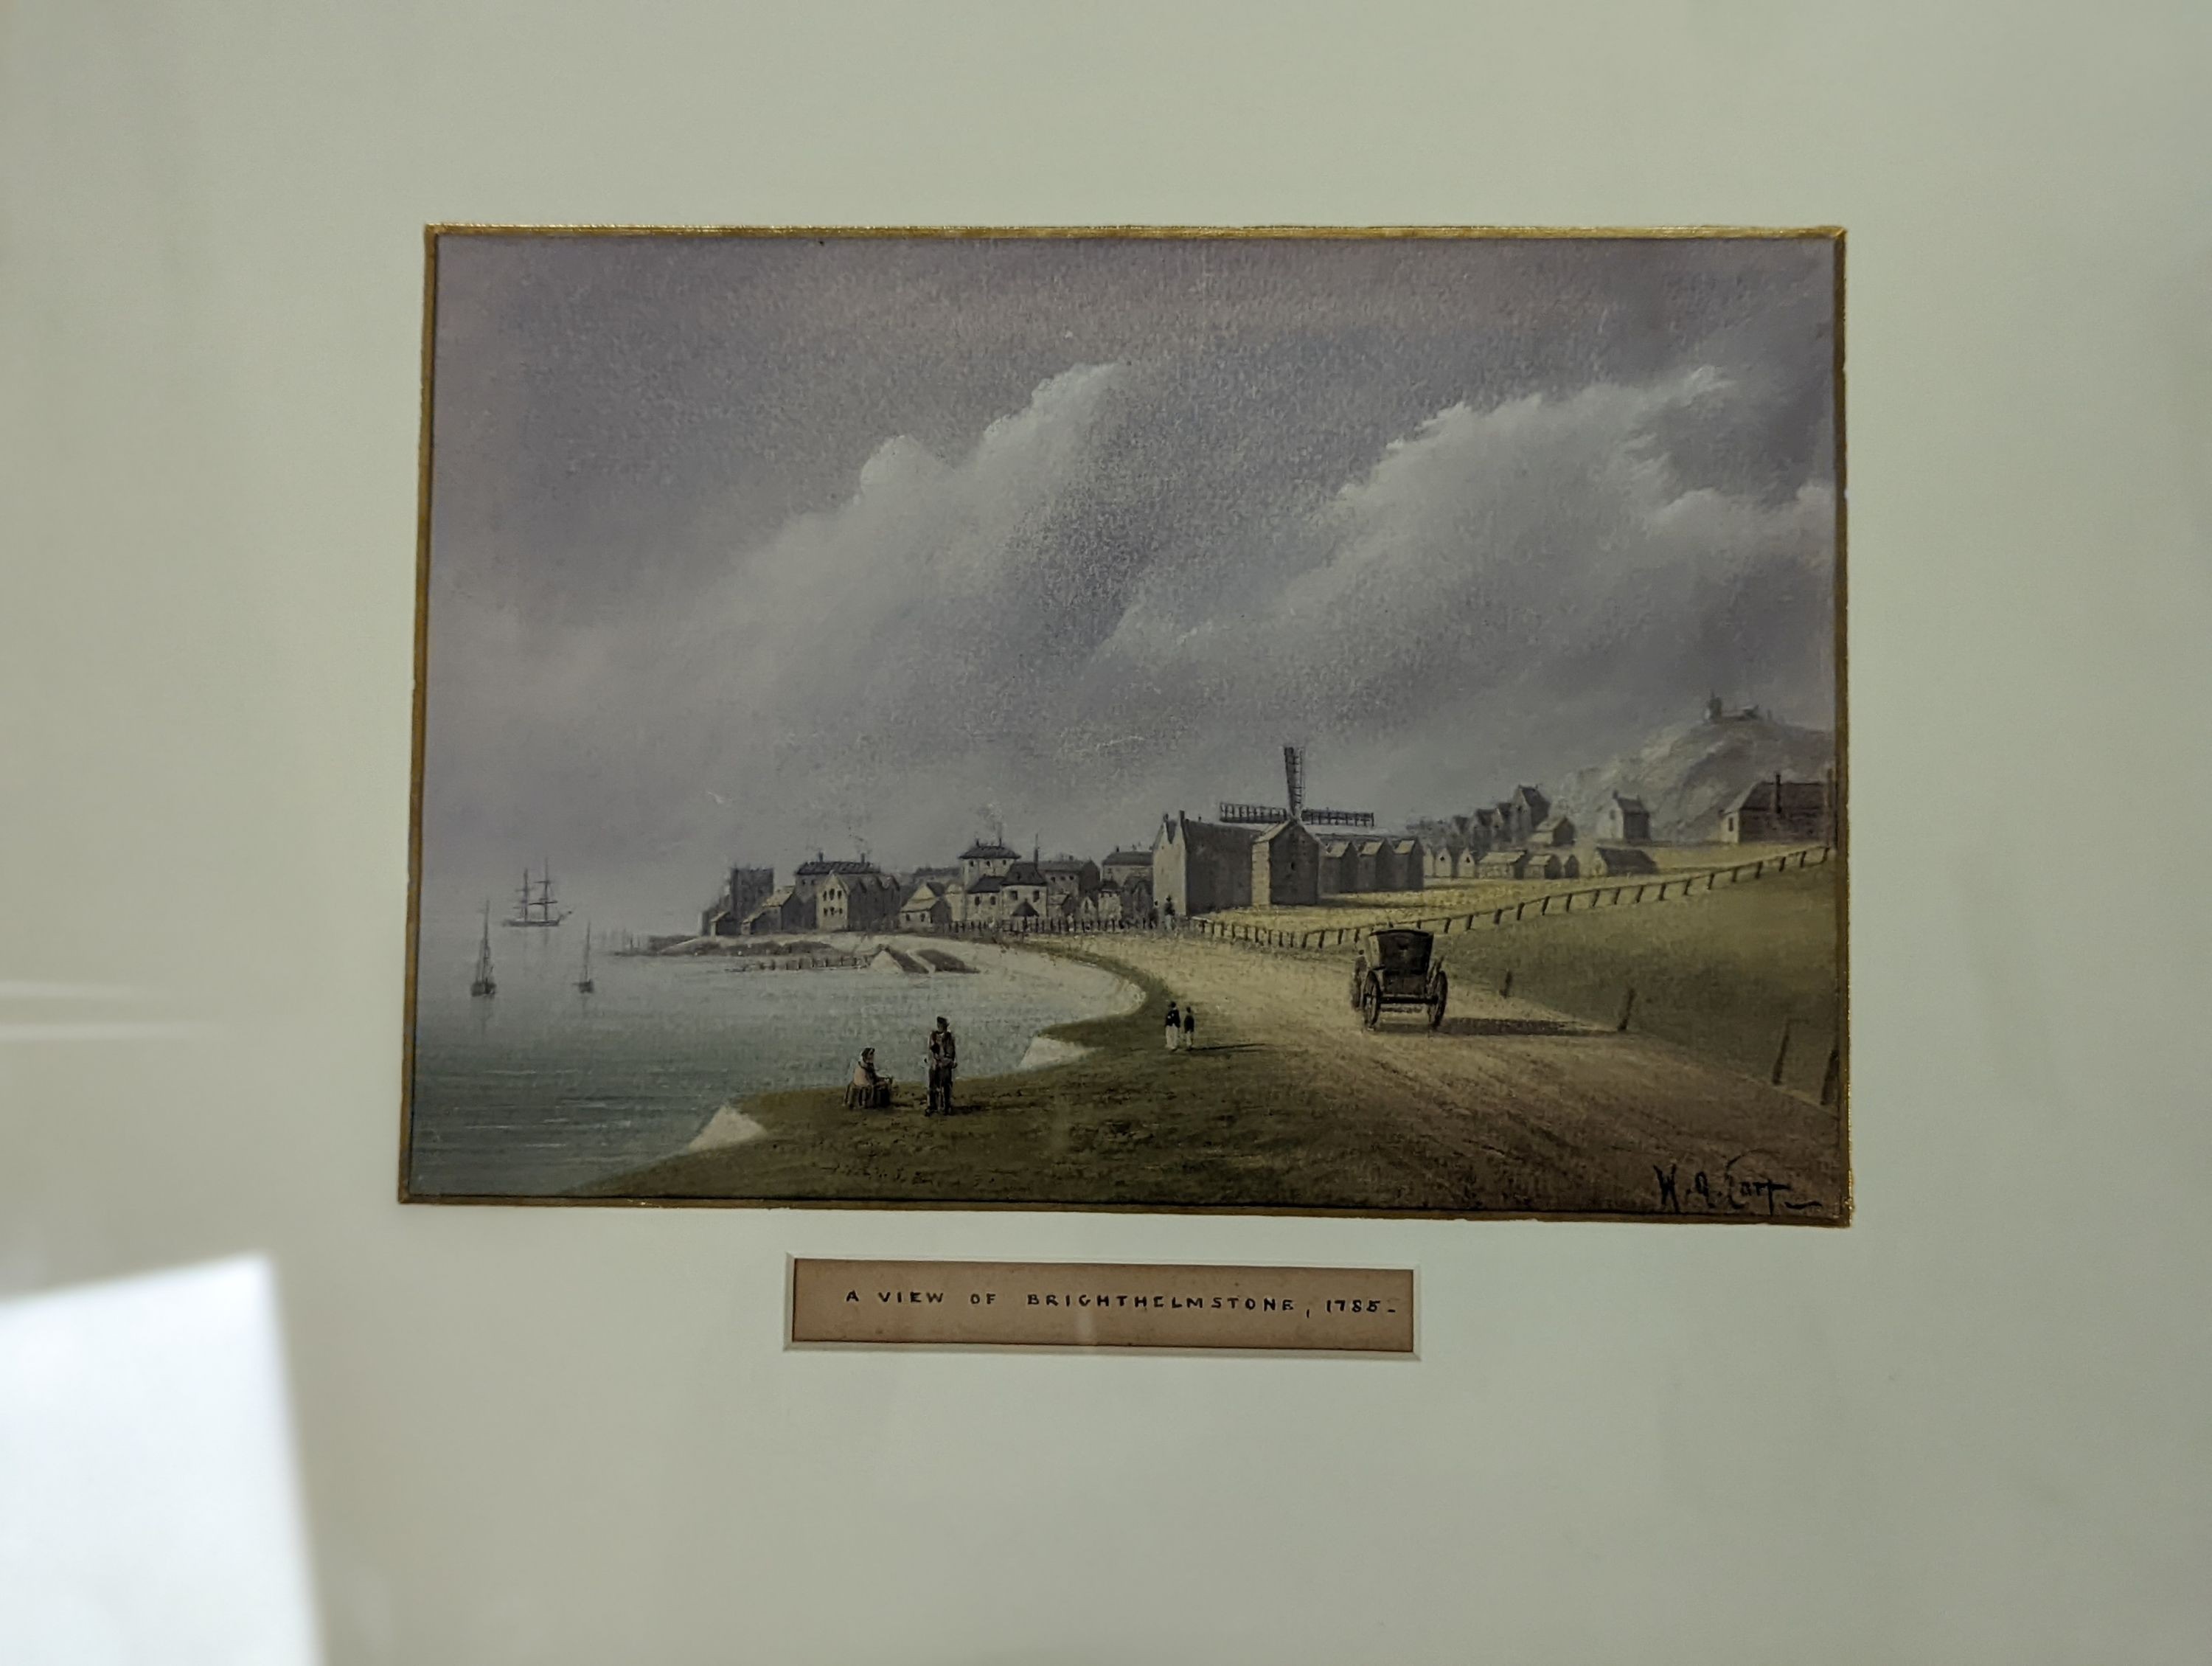 William Henry Earp (1831-1914), four watercolours, A view of Brighthelmstone 1785 and The Chain Pier 1828, The Old Chain Pier and Old Brighton 1810, signed, 15 x 22cm, with two colour prints of London